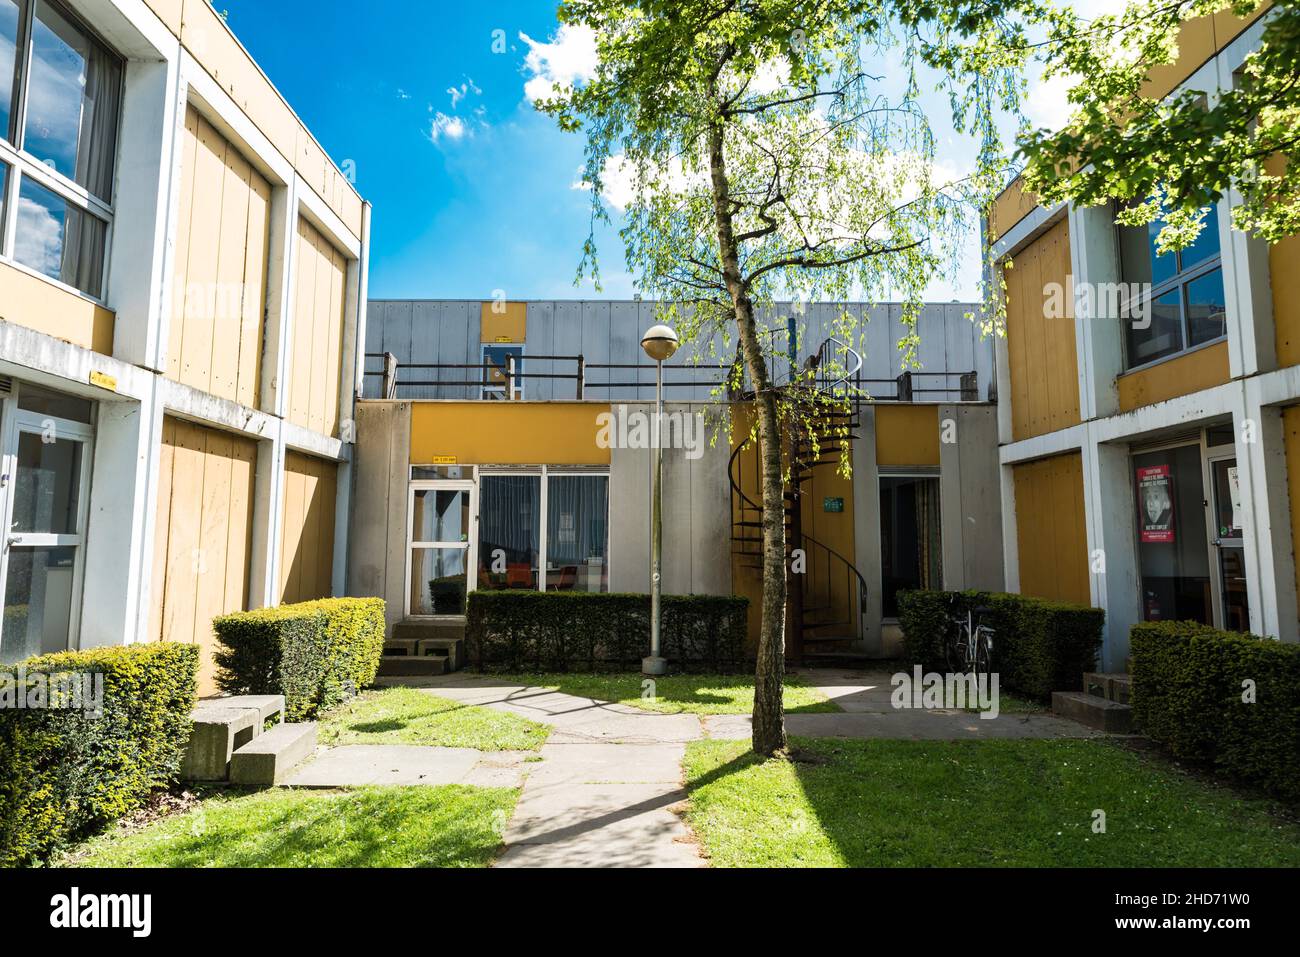 Auderghem, Brussels/ Belgium - 05 02 2018: Prefab colorful studenthouses and students at the campus of the Free University of Brussels. Stock Photo